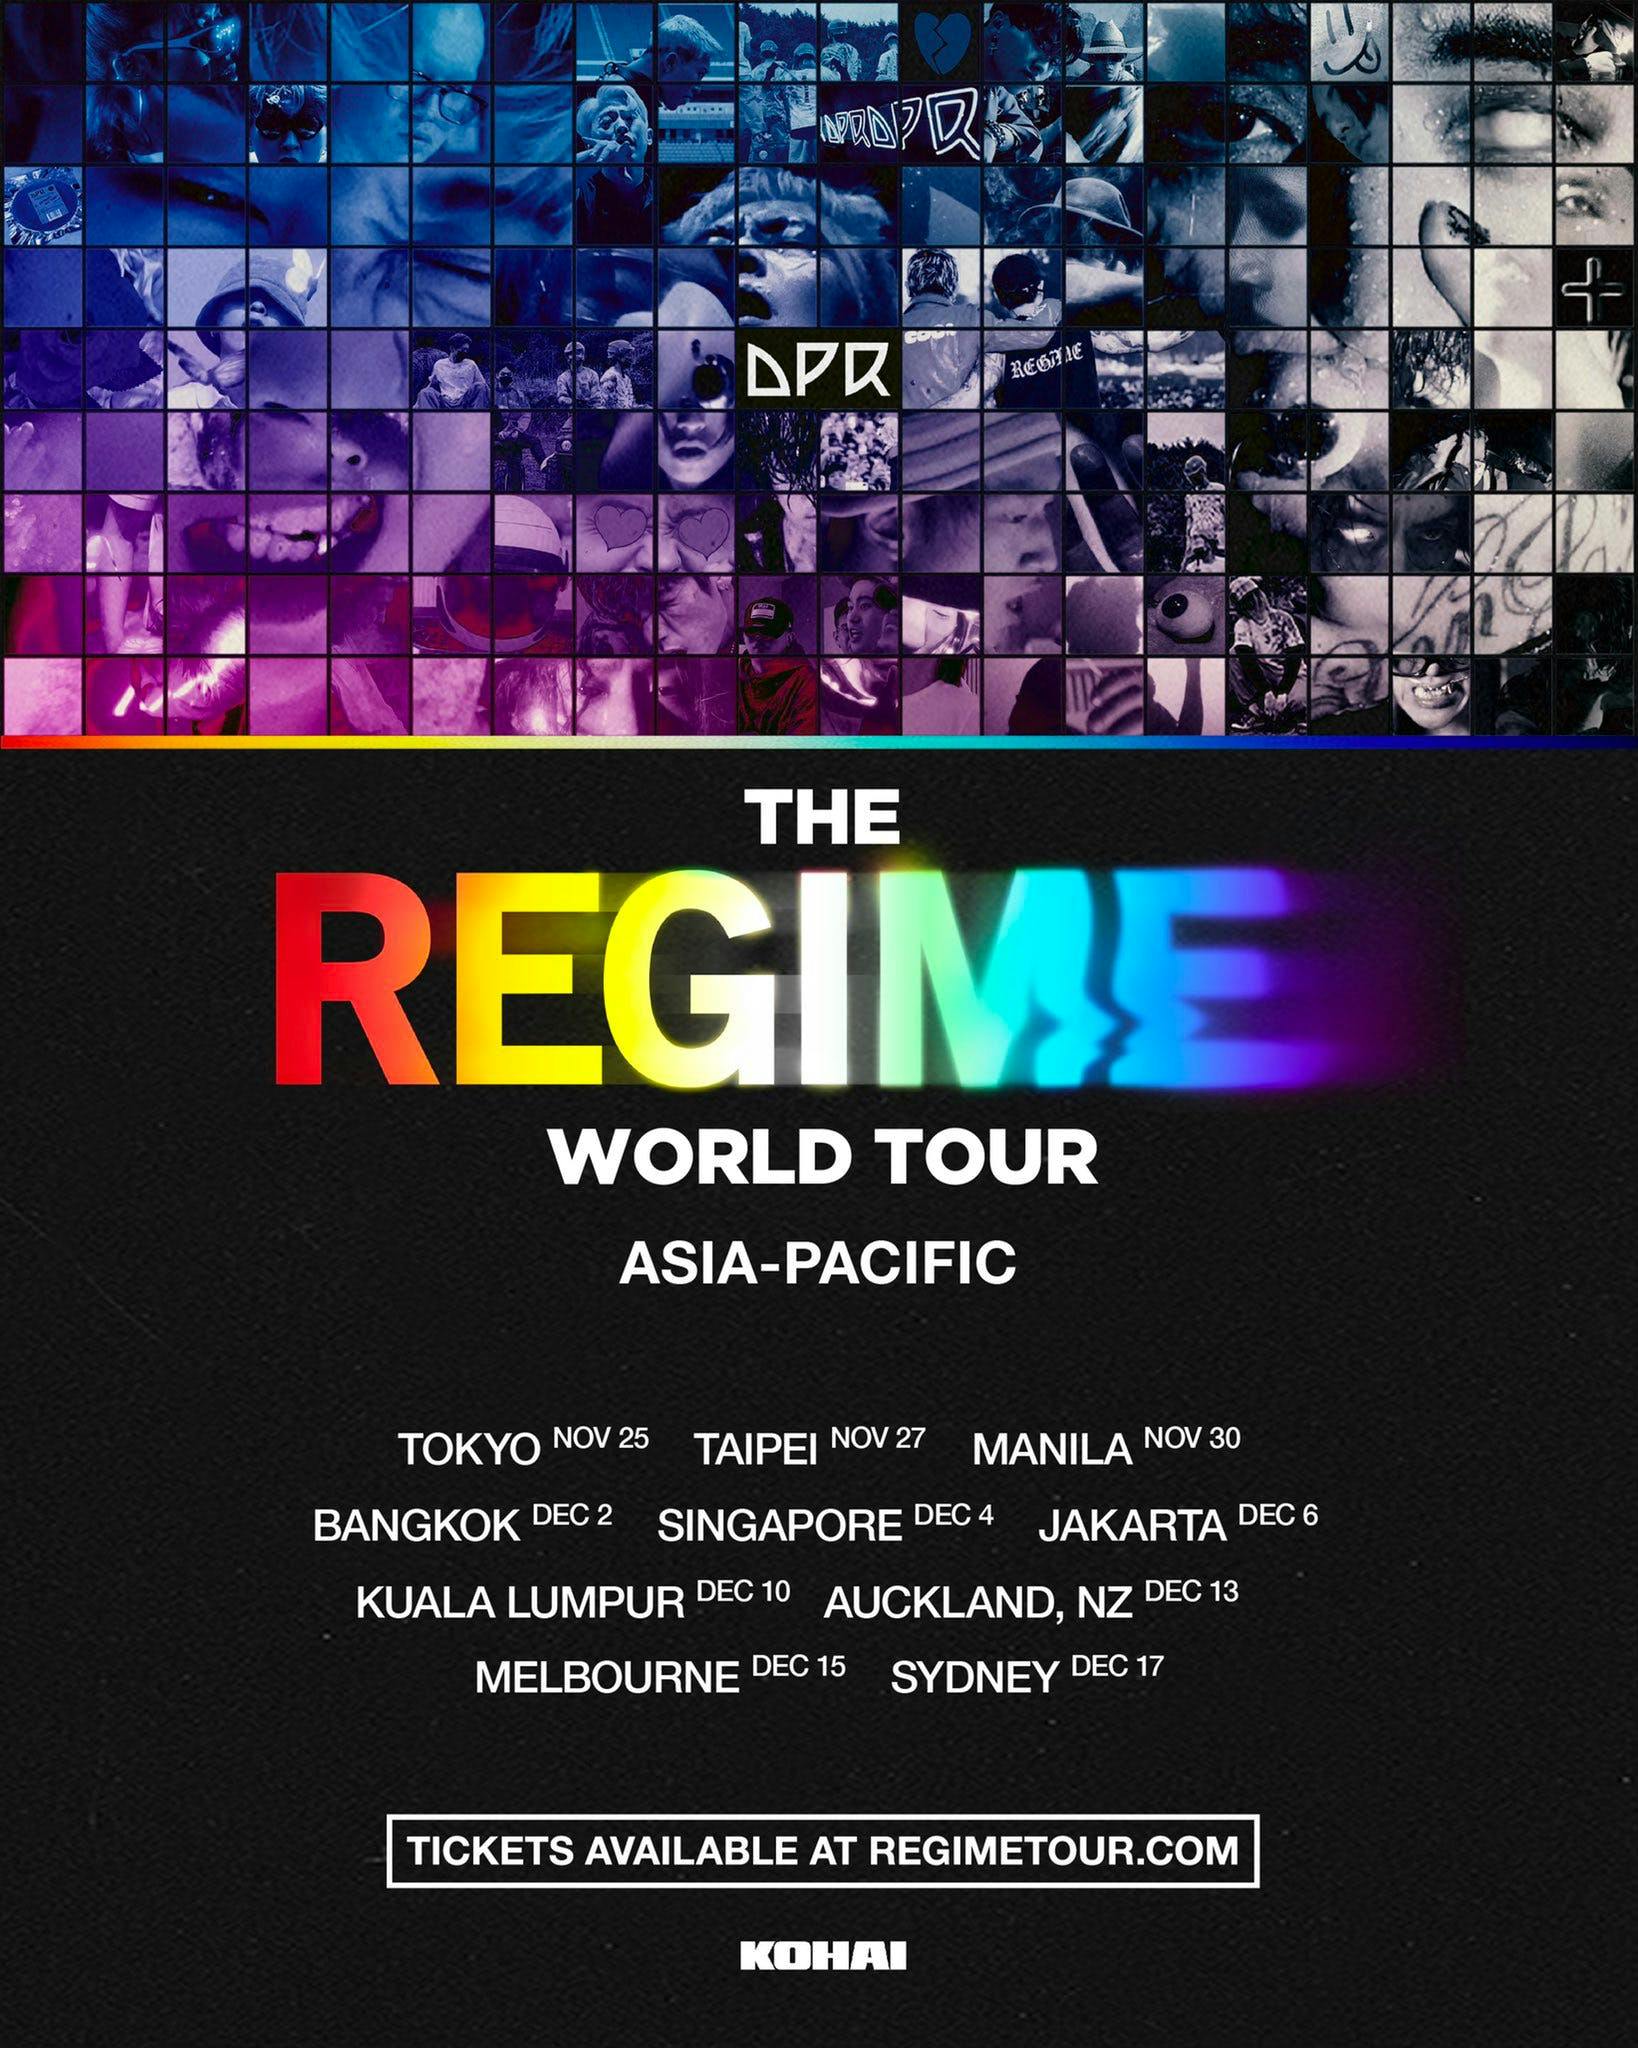 DPR The Upcoming Concerts in Singapore to Look Forward to 